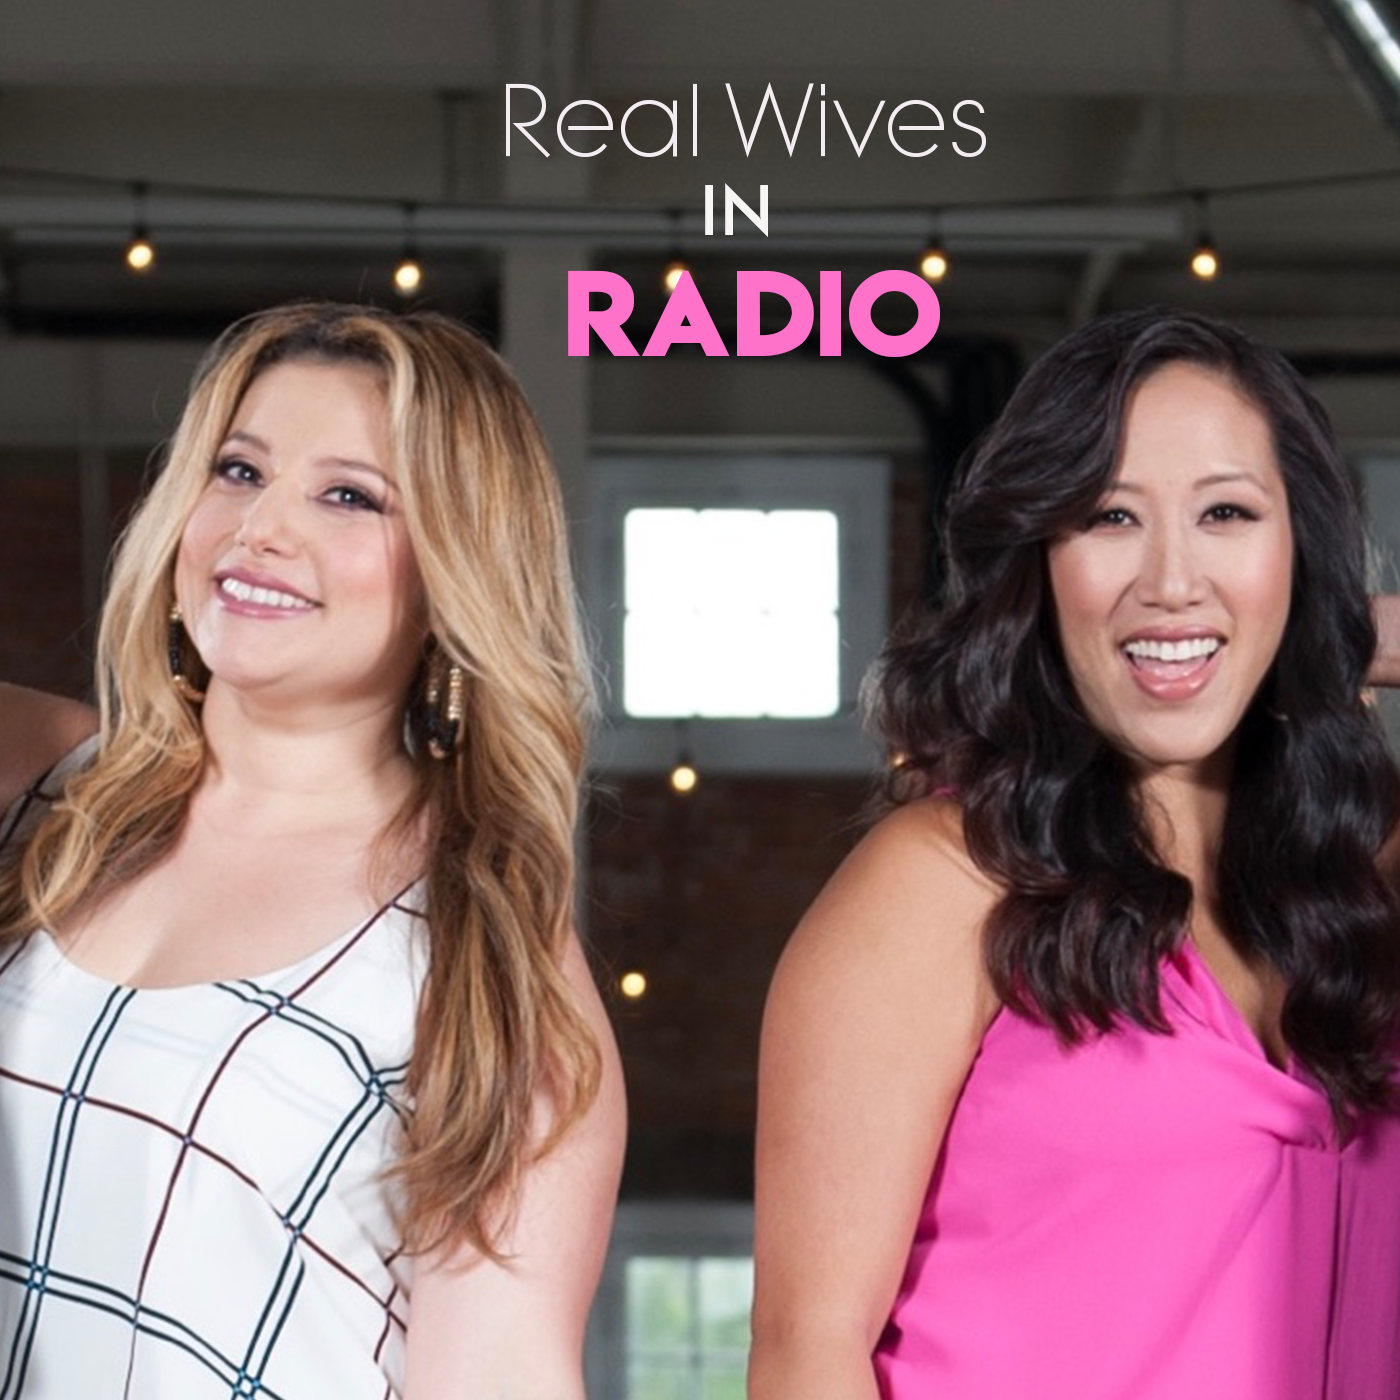 Real Wives In Radio - Episode 2 Let's Talk About Sex...ual Harassment (1).mp3